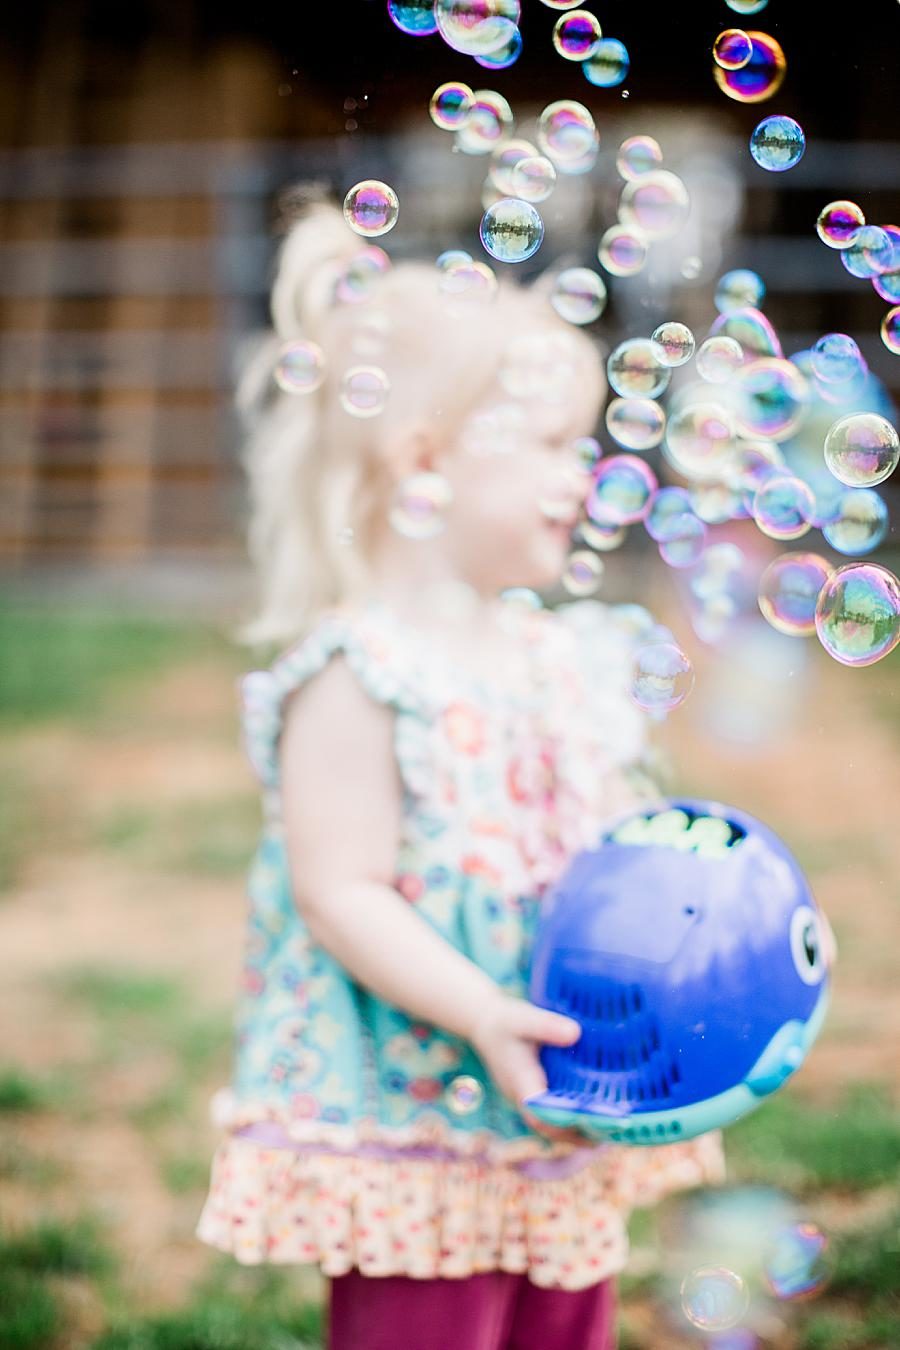 2 years old holding bubble machine